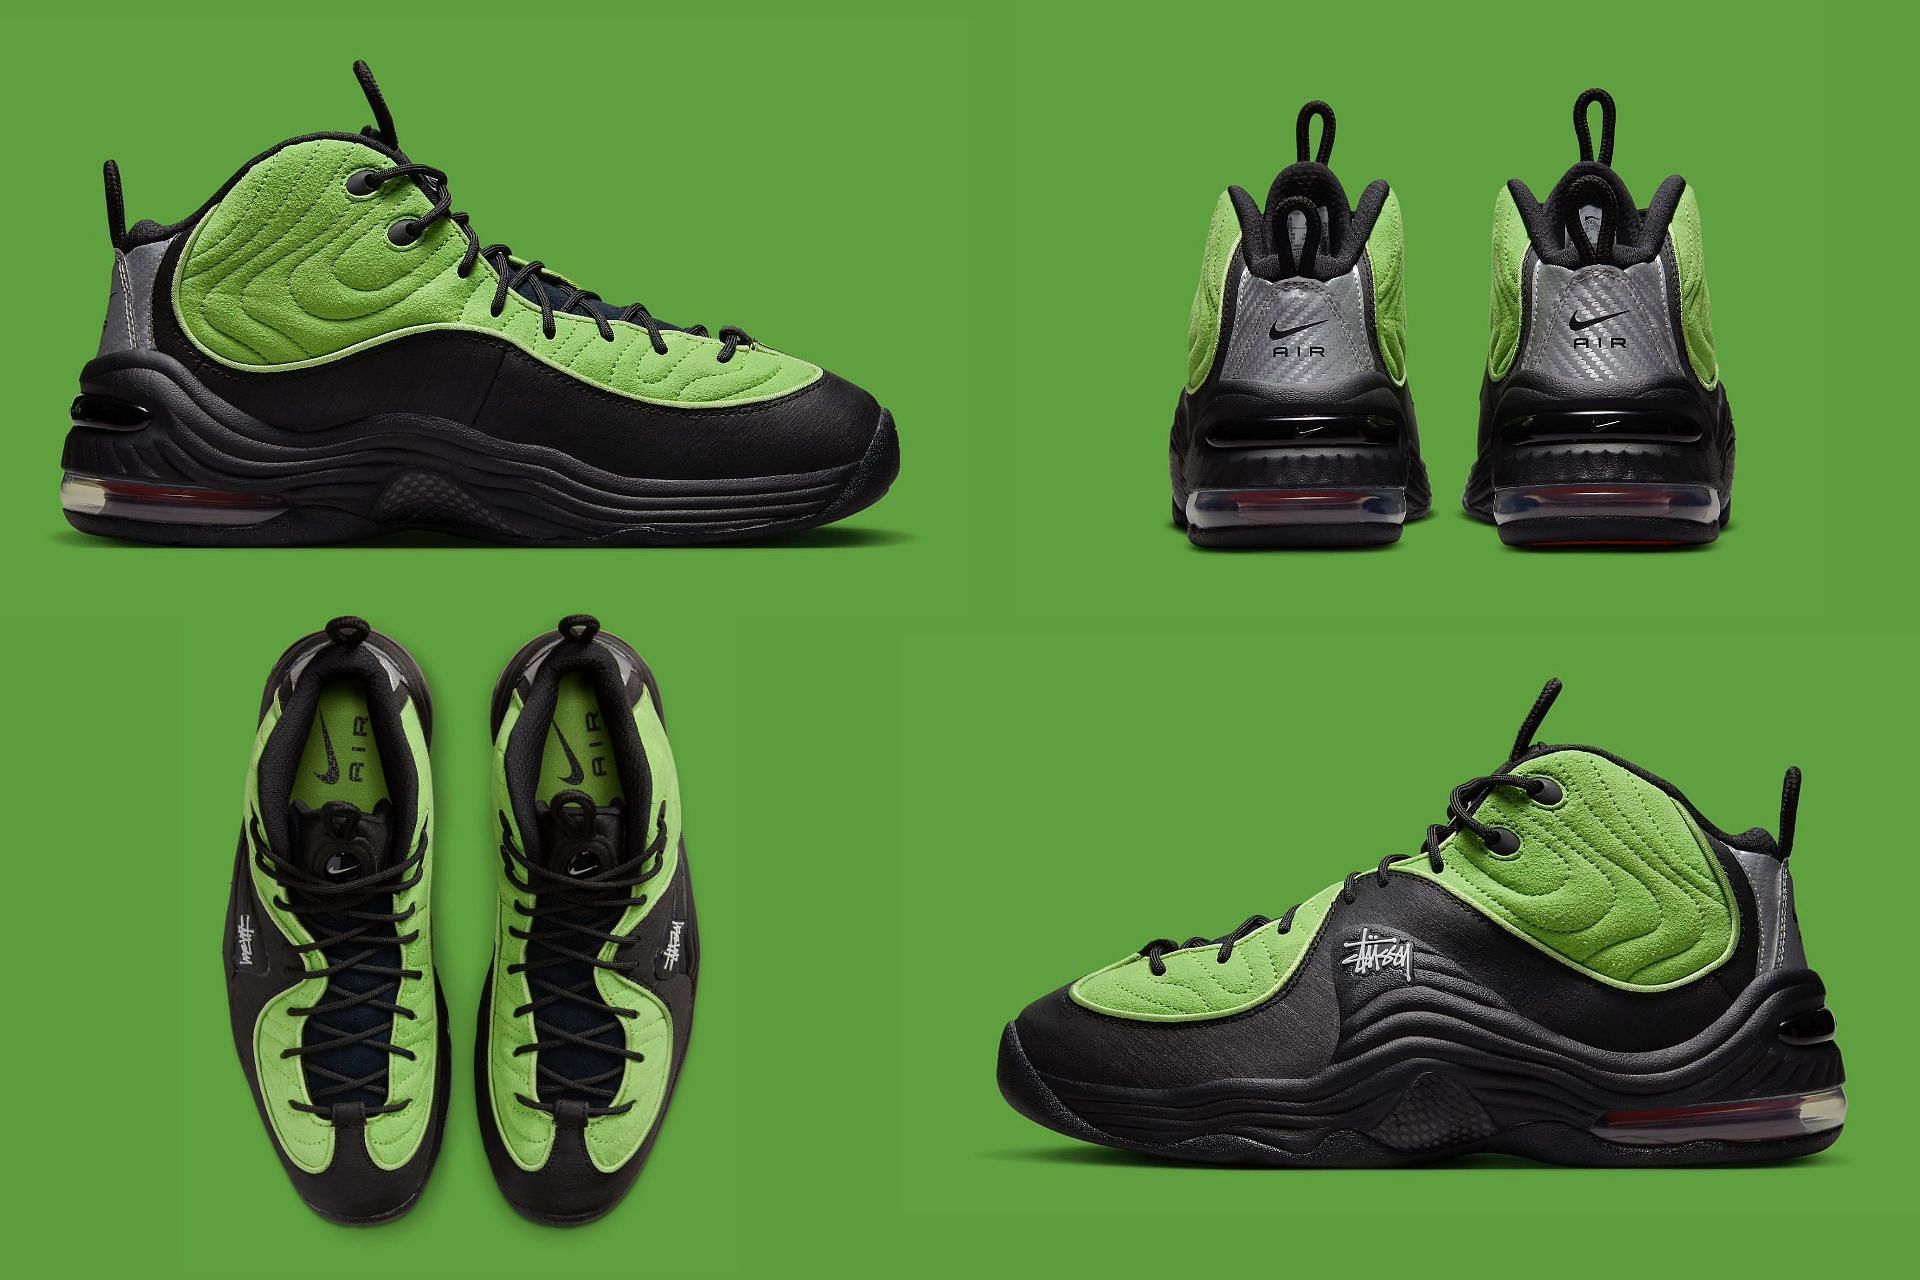 Where to buy Stussy x Nike Air Max Penny 2 “Black/Green” shoes